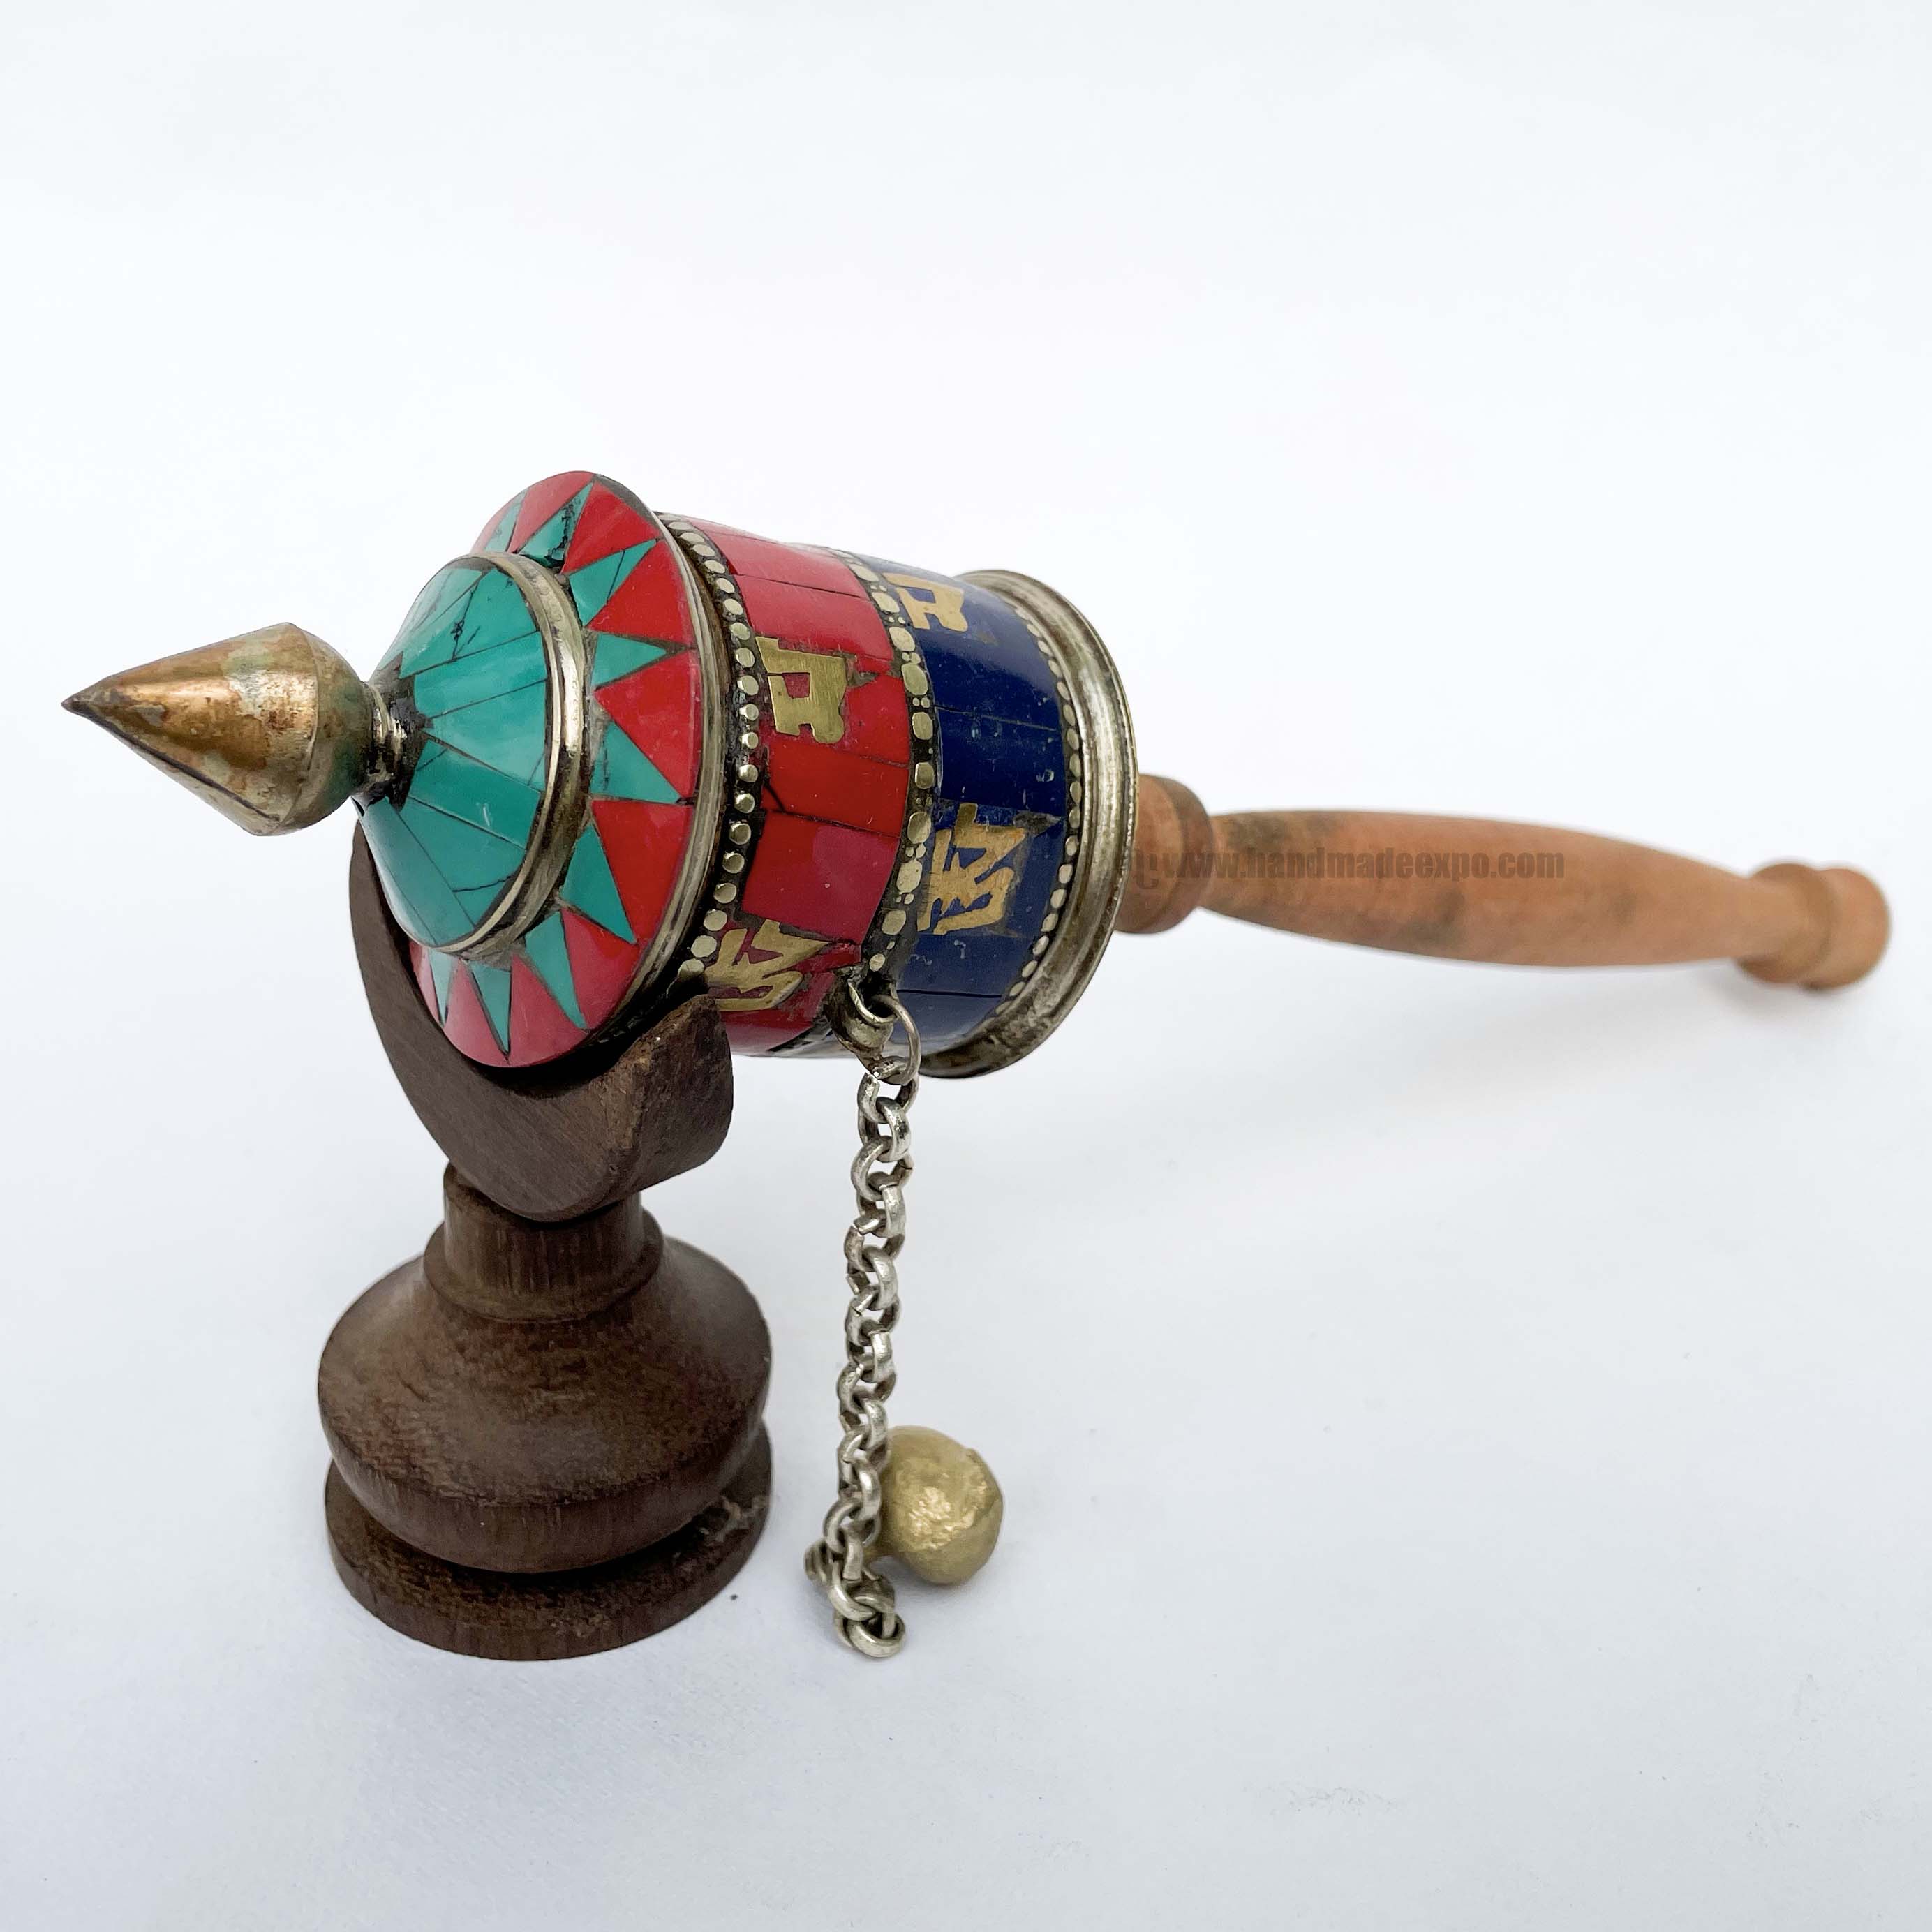 Brass Hand Held With Mantra Prayer Wheel, blue And Red Color